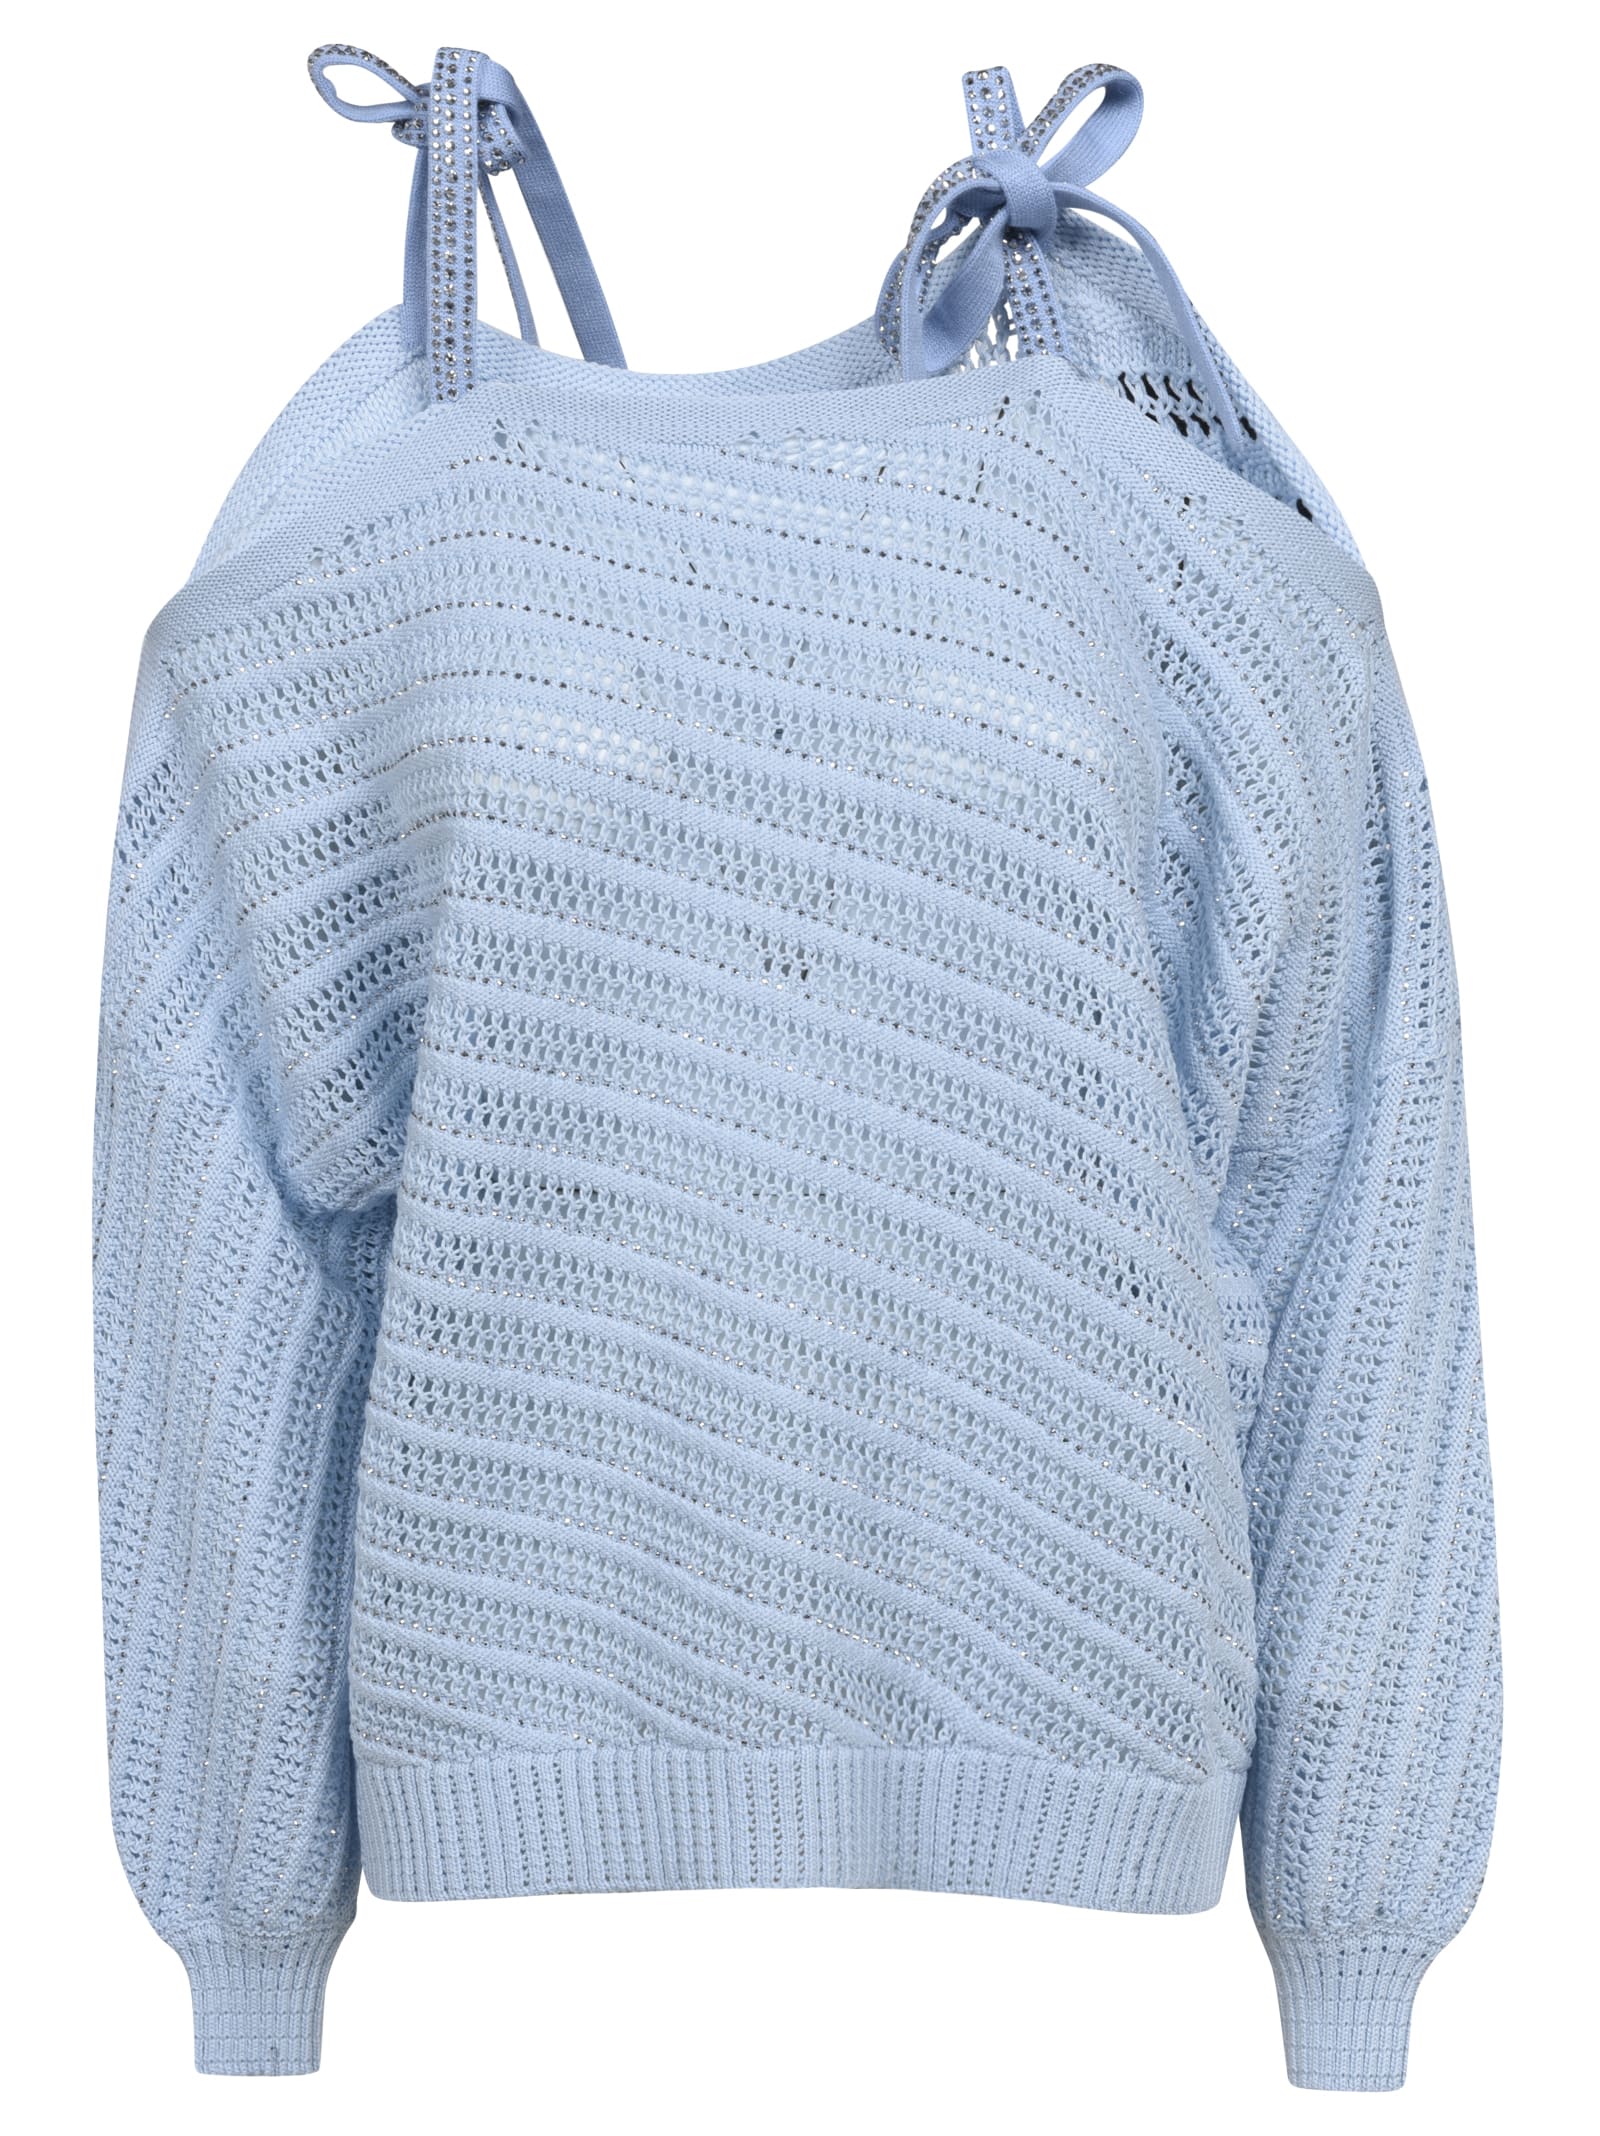 Ermanno Scervino Stripe Patterned Perforated Sweater